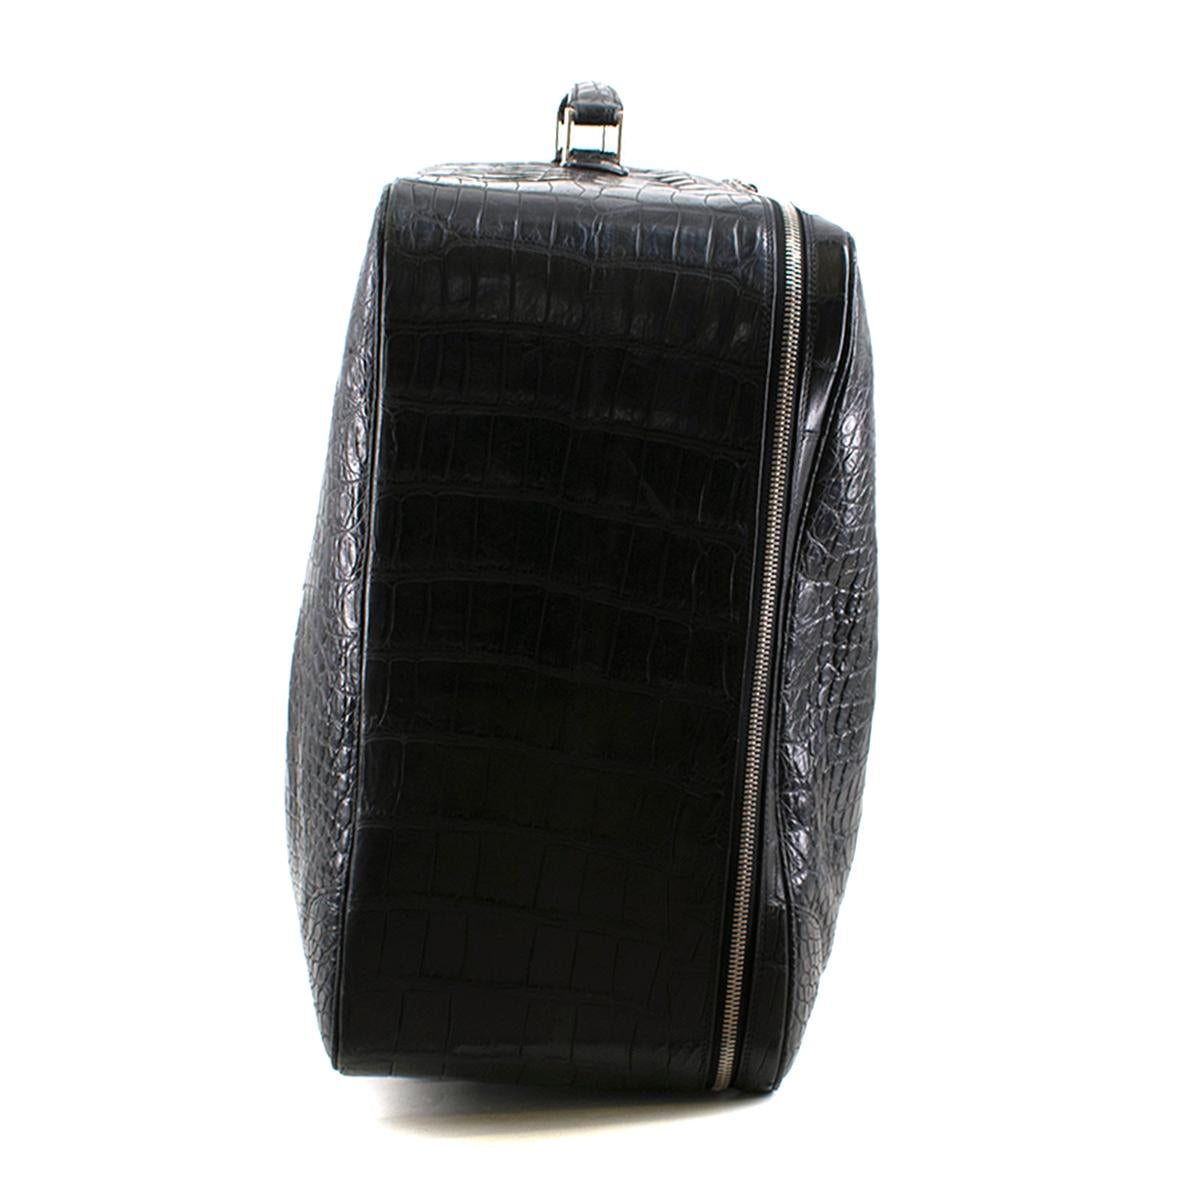 Bespoke large black crocodile leather suitcase

- Black, matte crocodile leather 
- Top handle, comes with a protective handle cover 
- Silver-tone metal hardware and protective plastic feet 
- Zip-around closure 
- Internal zip-fastening